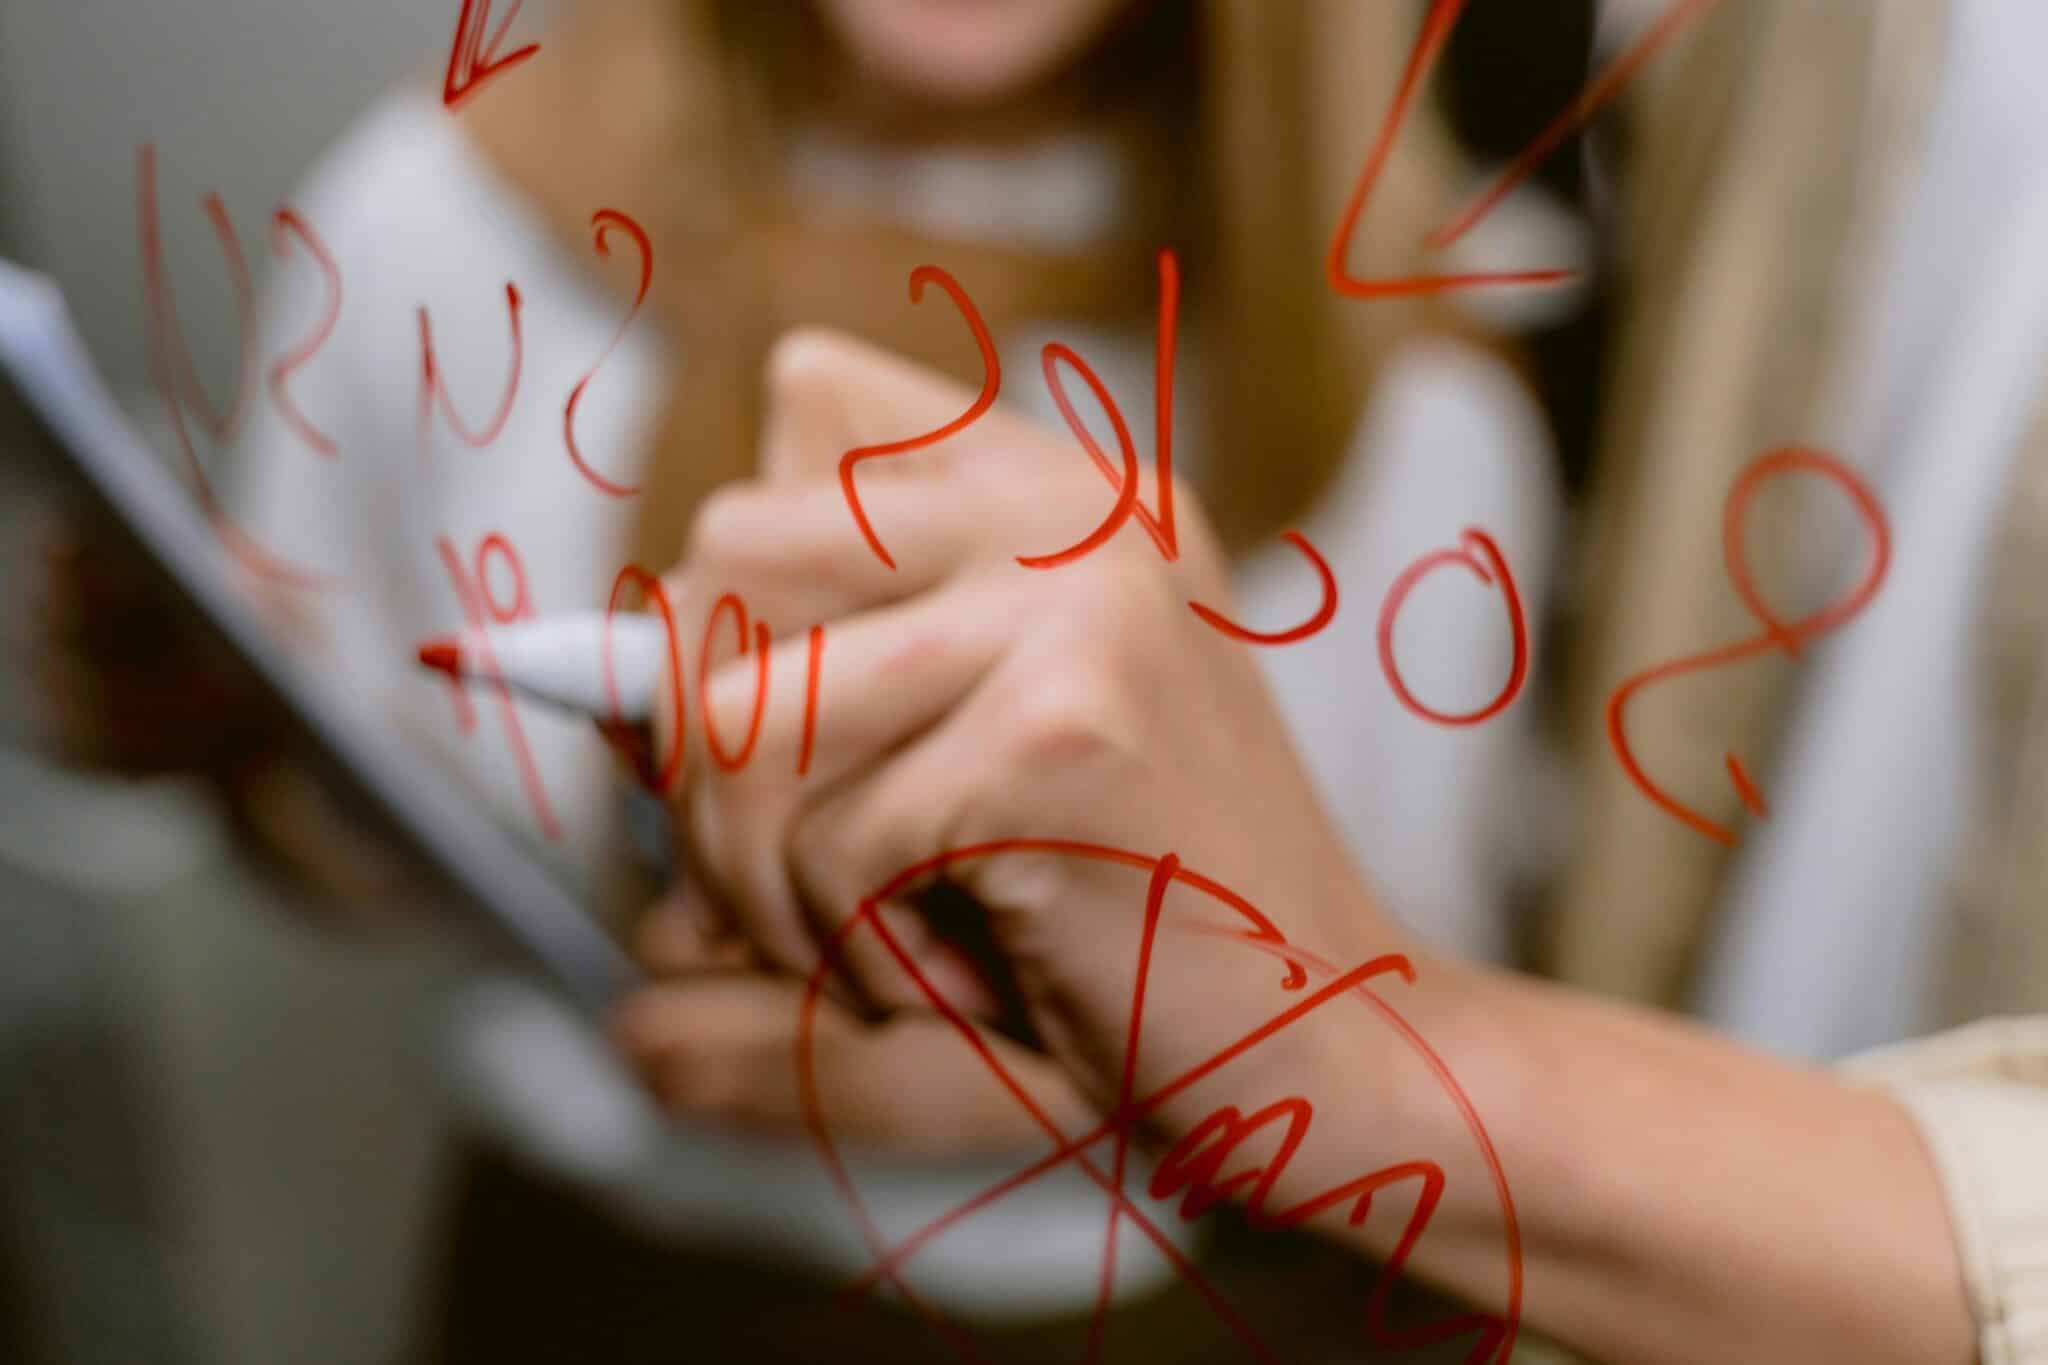 Woman with red marker writes calculations on glass surface